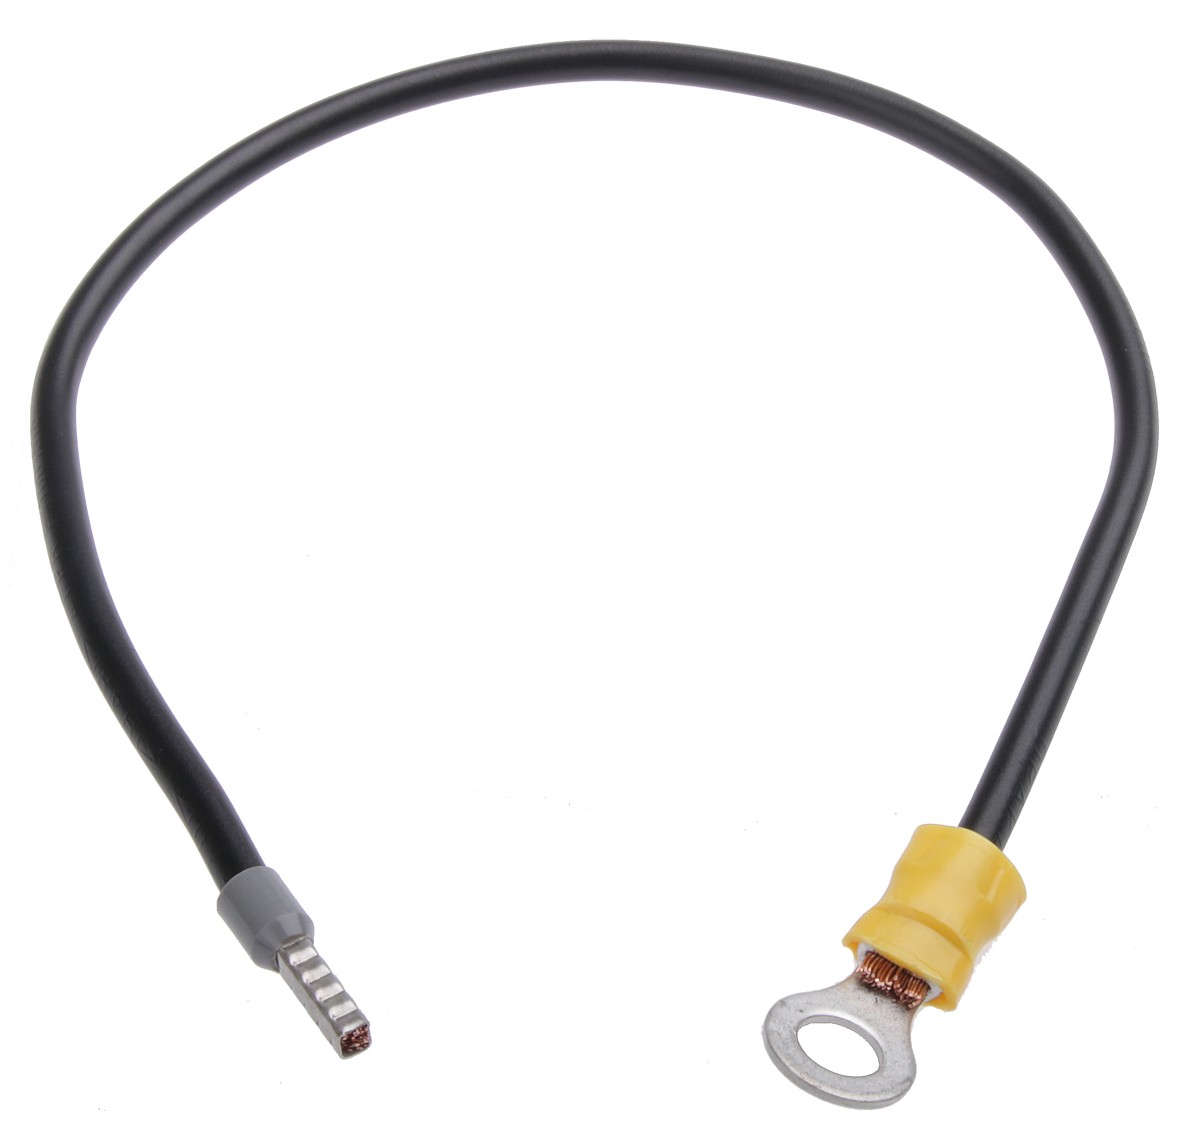 DC-DC cable between battery and power source, 120cm, M8 hole - wire end